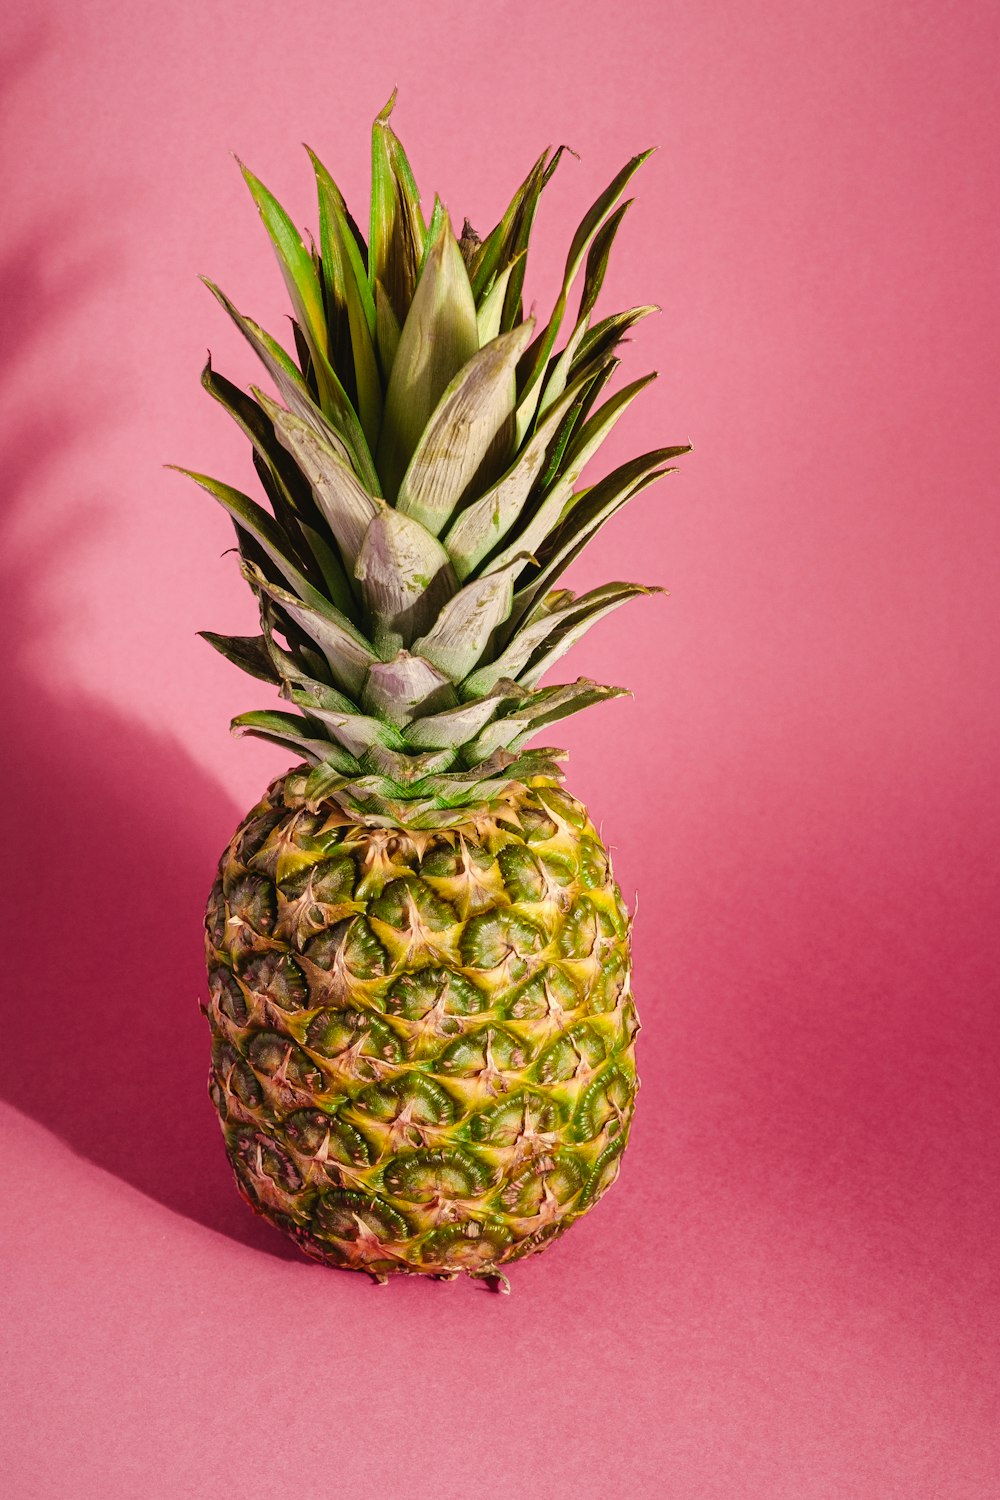 Pink Pineapple Pictures | Download Free Images on Unsplash